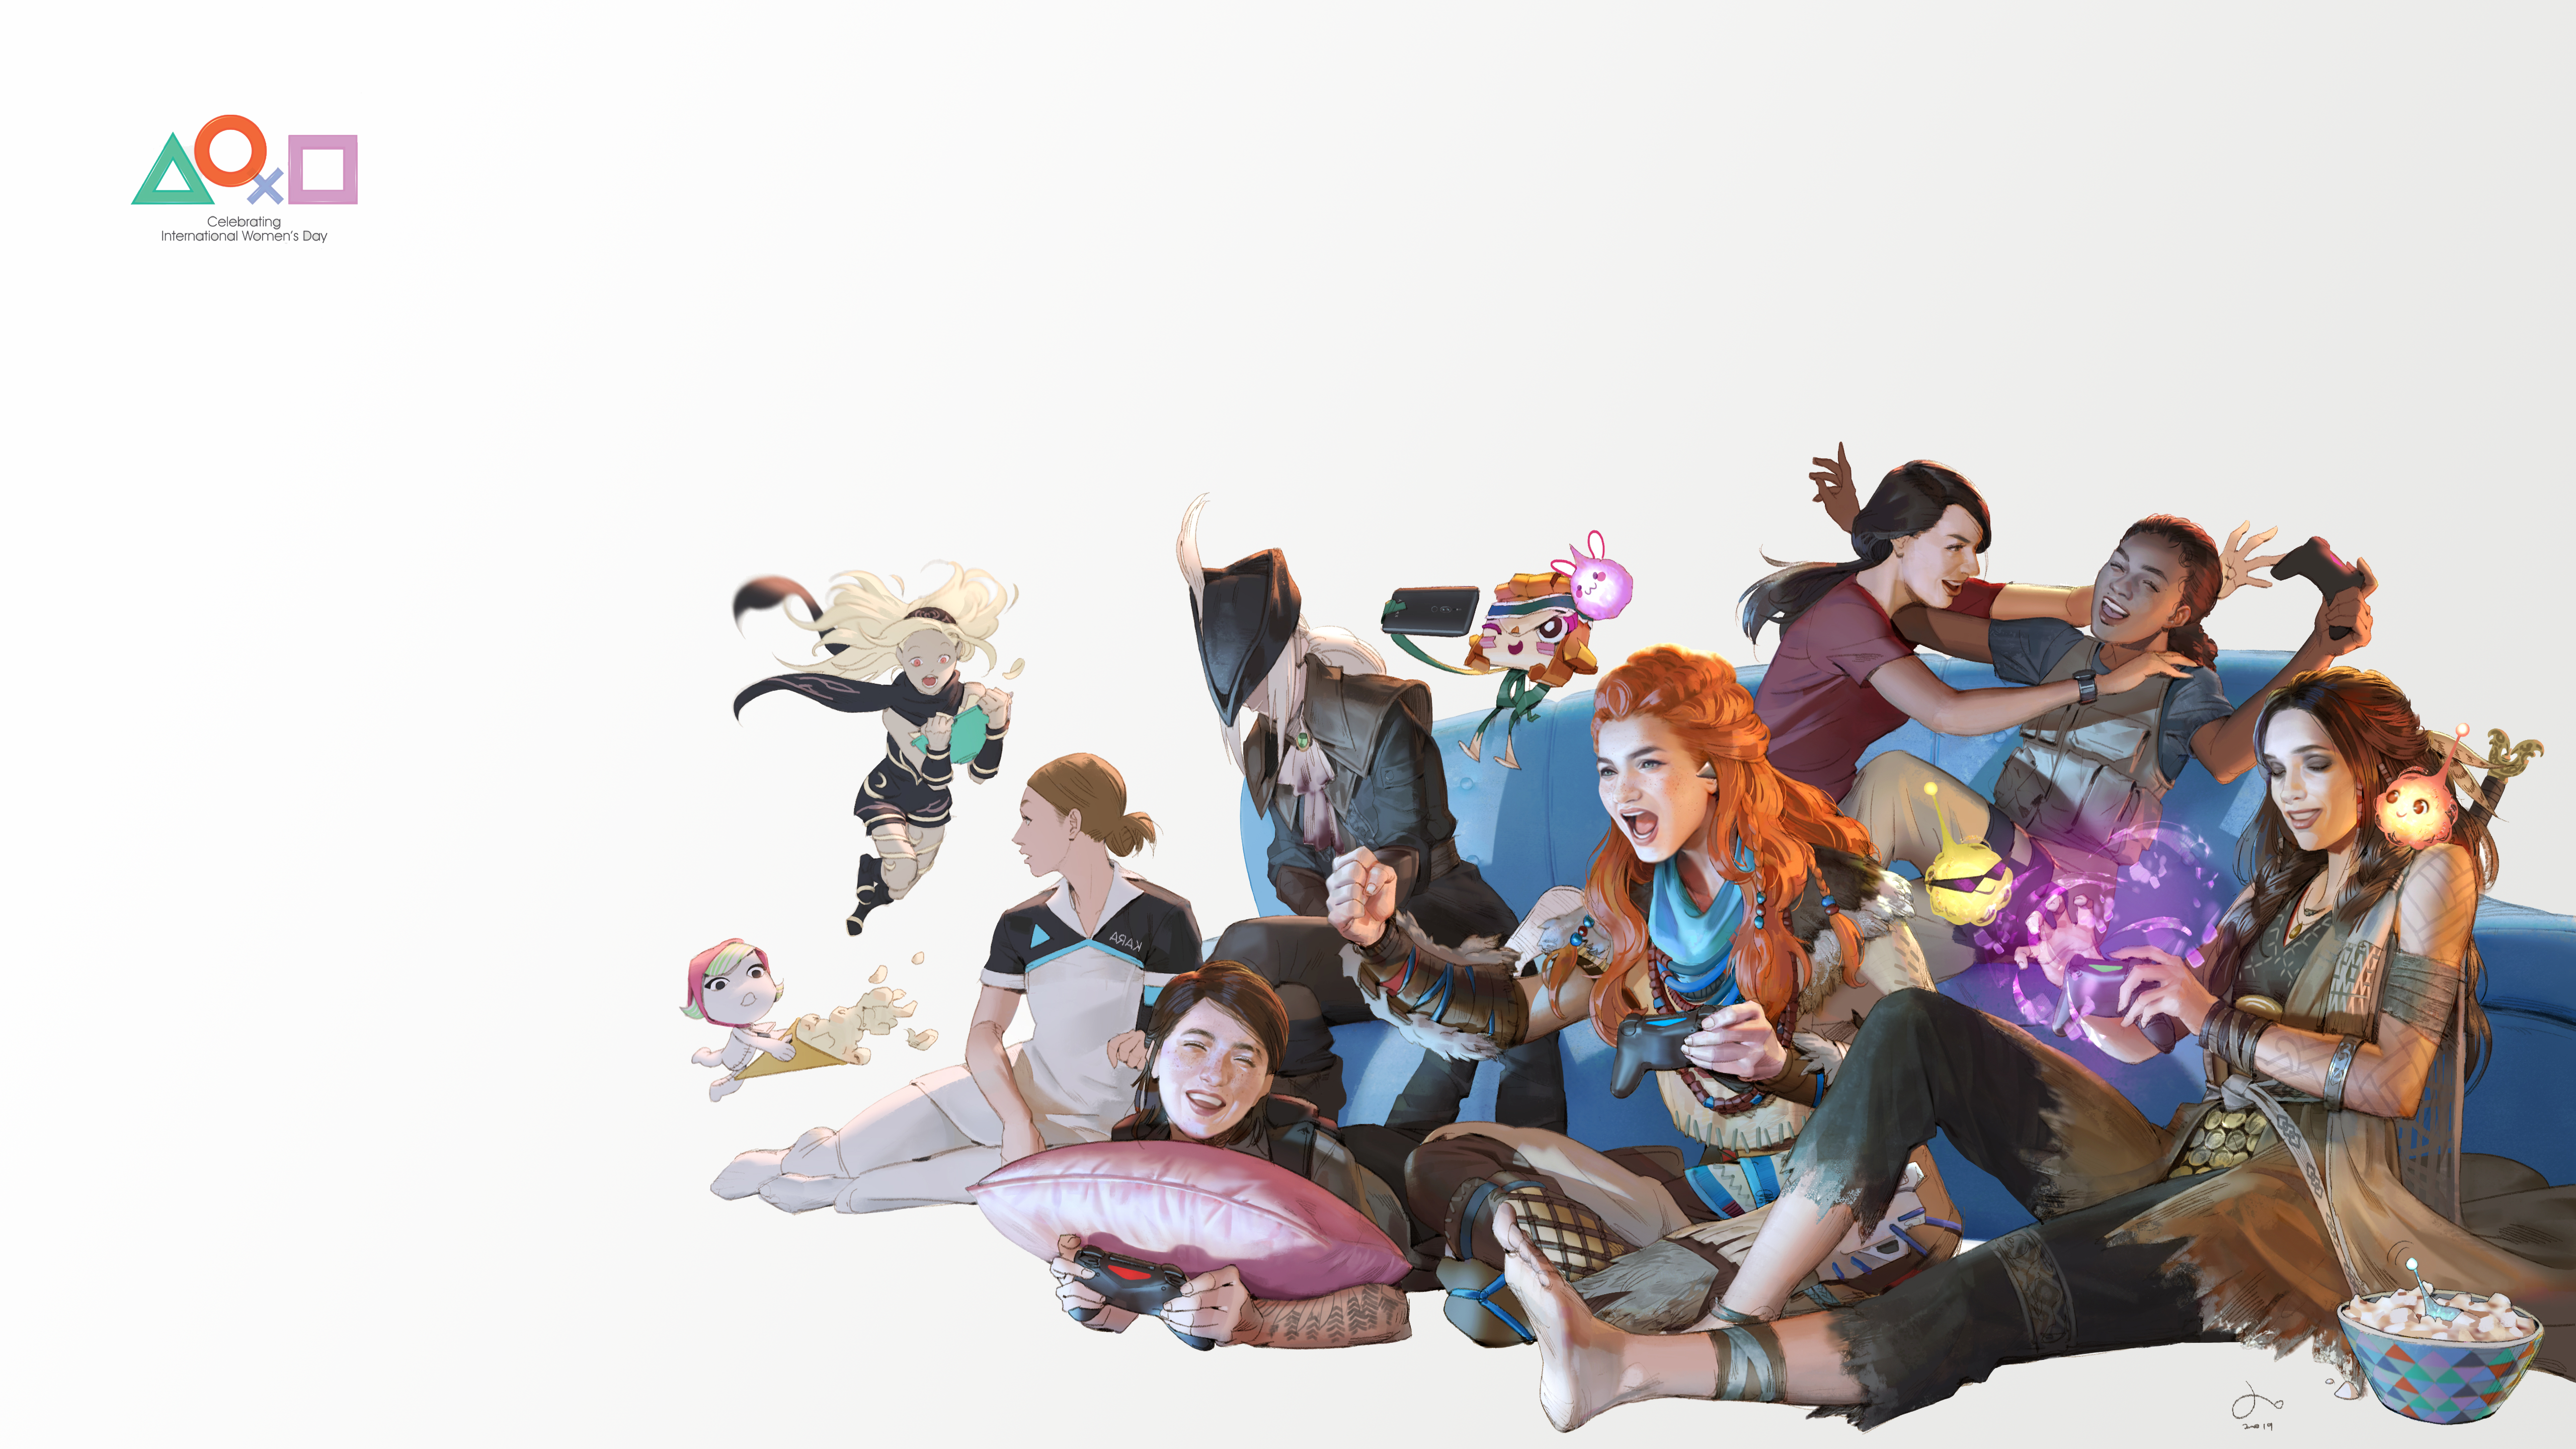 Made a wallpaper of the international womens day art if anyone wants it rplaystation